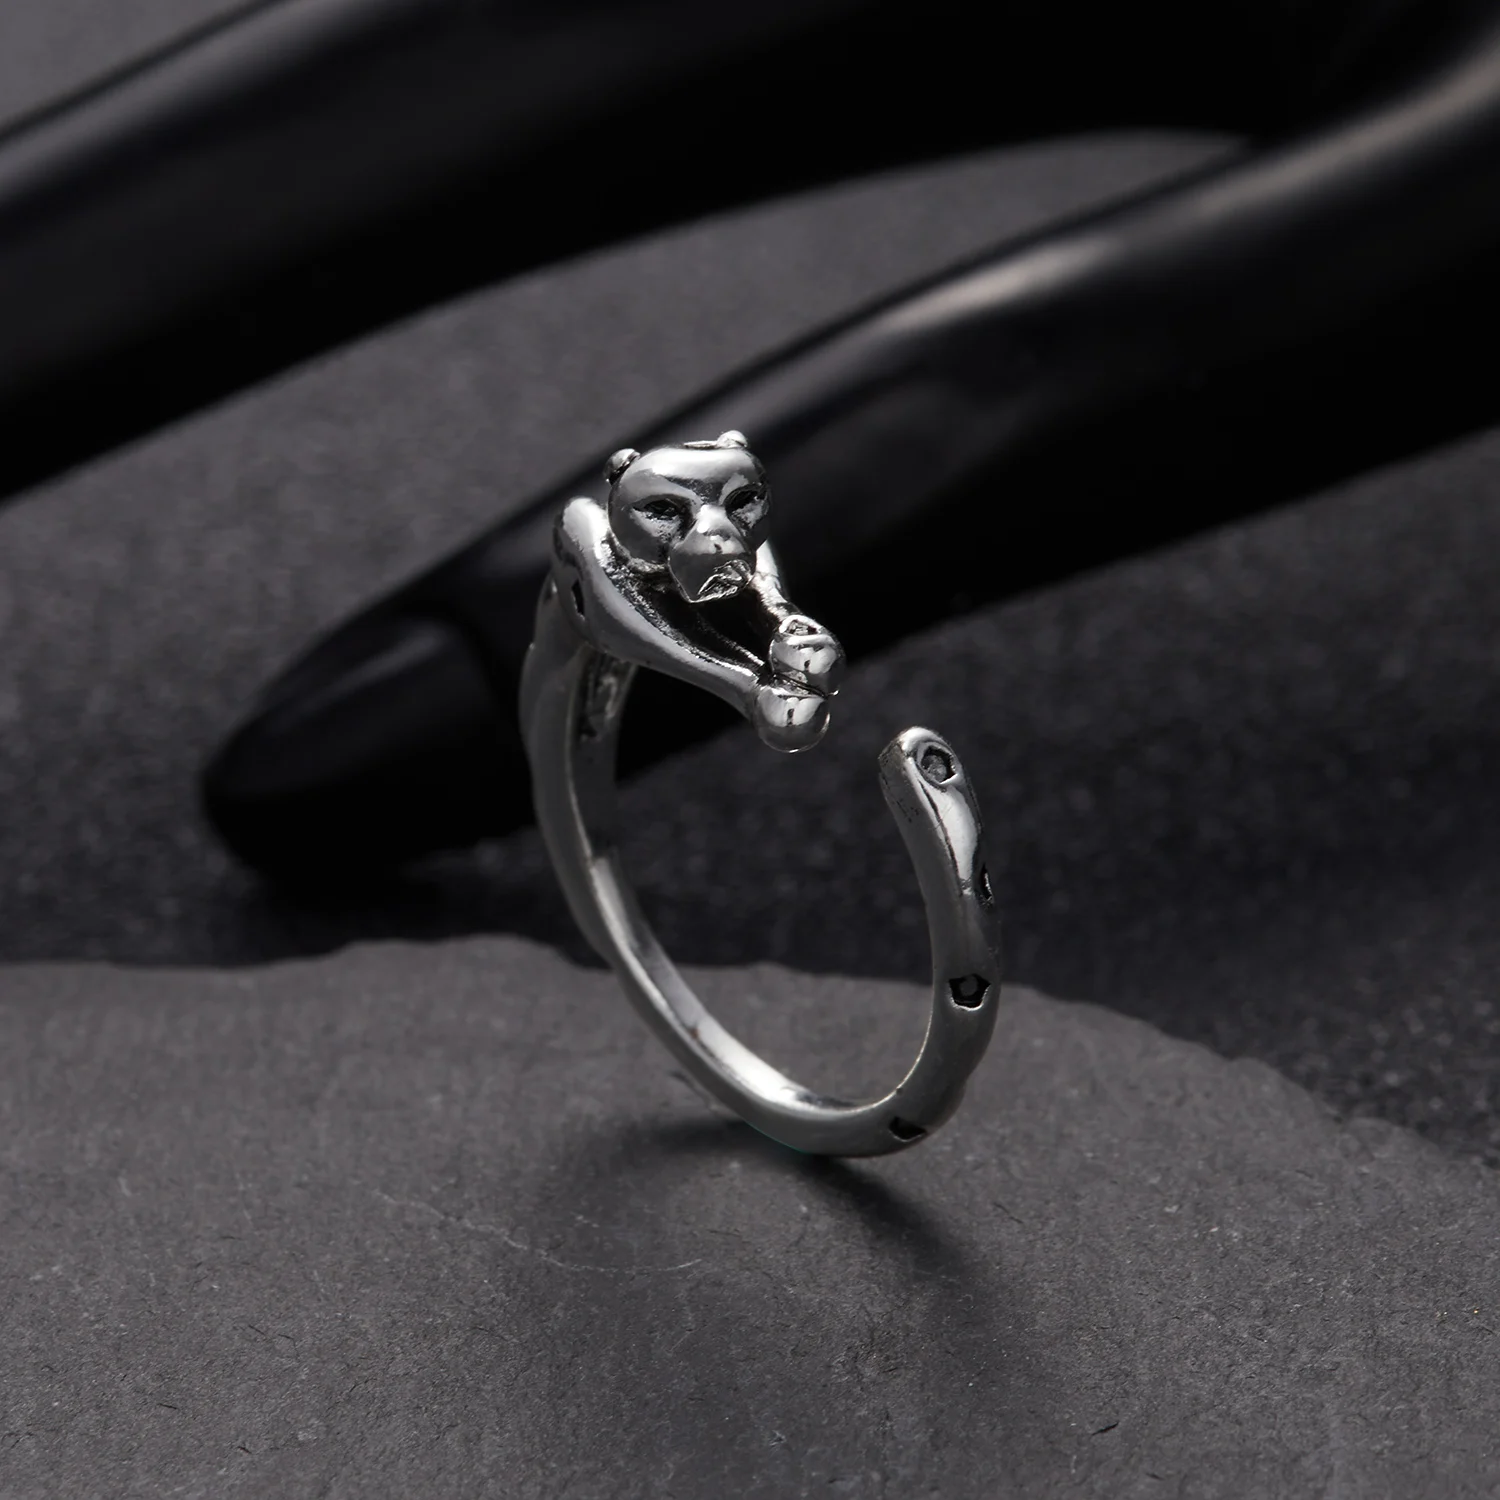 Cute Fortune Cat Animal Rings Couple Jewelry Adjustable Finger Rings For Men Lover Women Lady Girl Boy Male Valentine's Day Gift